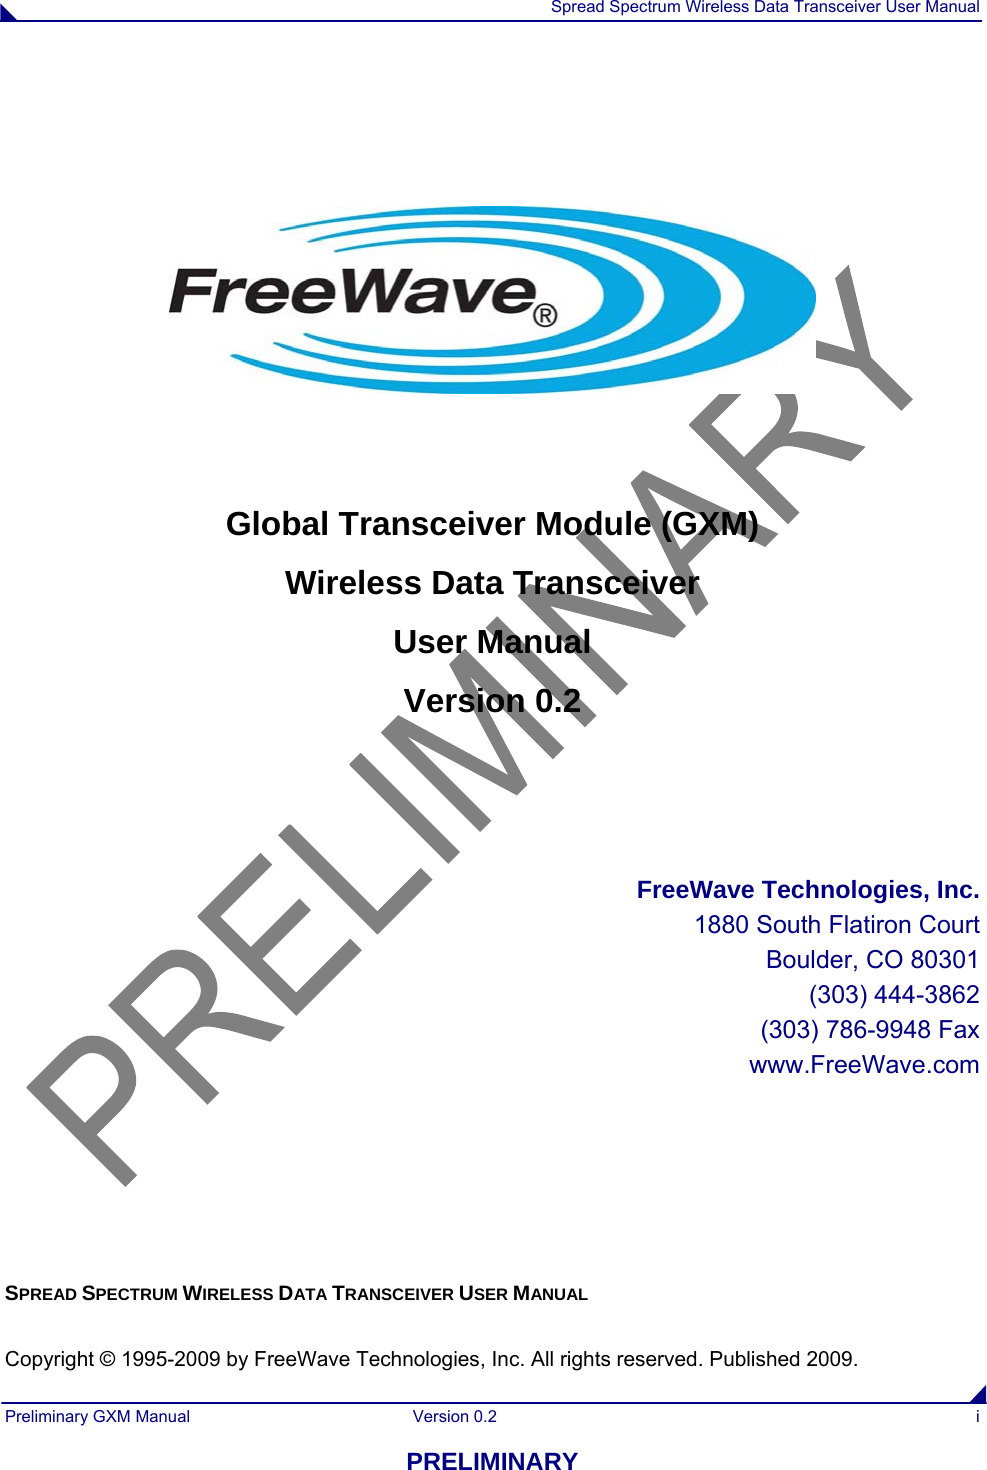  Spread Spectrum Wireless Data Transceiver User Manual Preliminary GXM Manual  Version 0.2  i PRELIMINARY       Global Transceiver Module (GXM) Wireless Data Transceiver User Manual Version 0.2    FreeWave Technologies, Inc. 1880 South Flatiron Court Boulder, CO 80301 (303) 444-3862 (303) 786-9948 Fax www.FreeWave.com       SPREAD SPECTRUM WIRELESS DATA TRANSCEIVER USER MANUAL  Copyright © 1995-2009 by FreeWave Technologies, Inc. All rights reserved. Published 2009. 